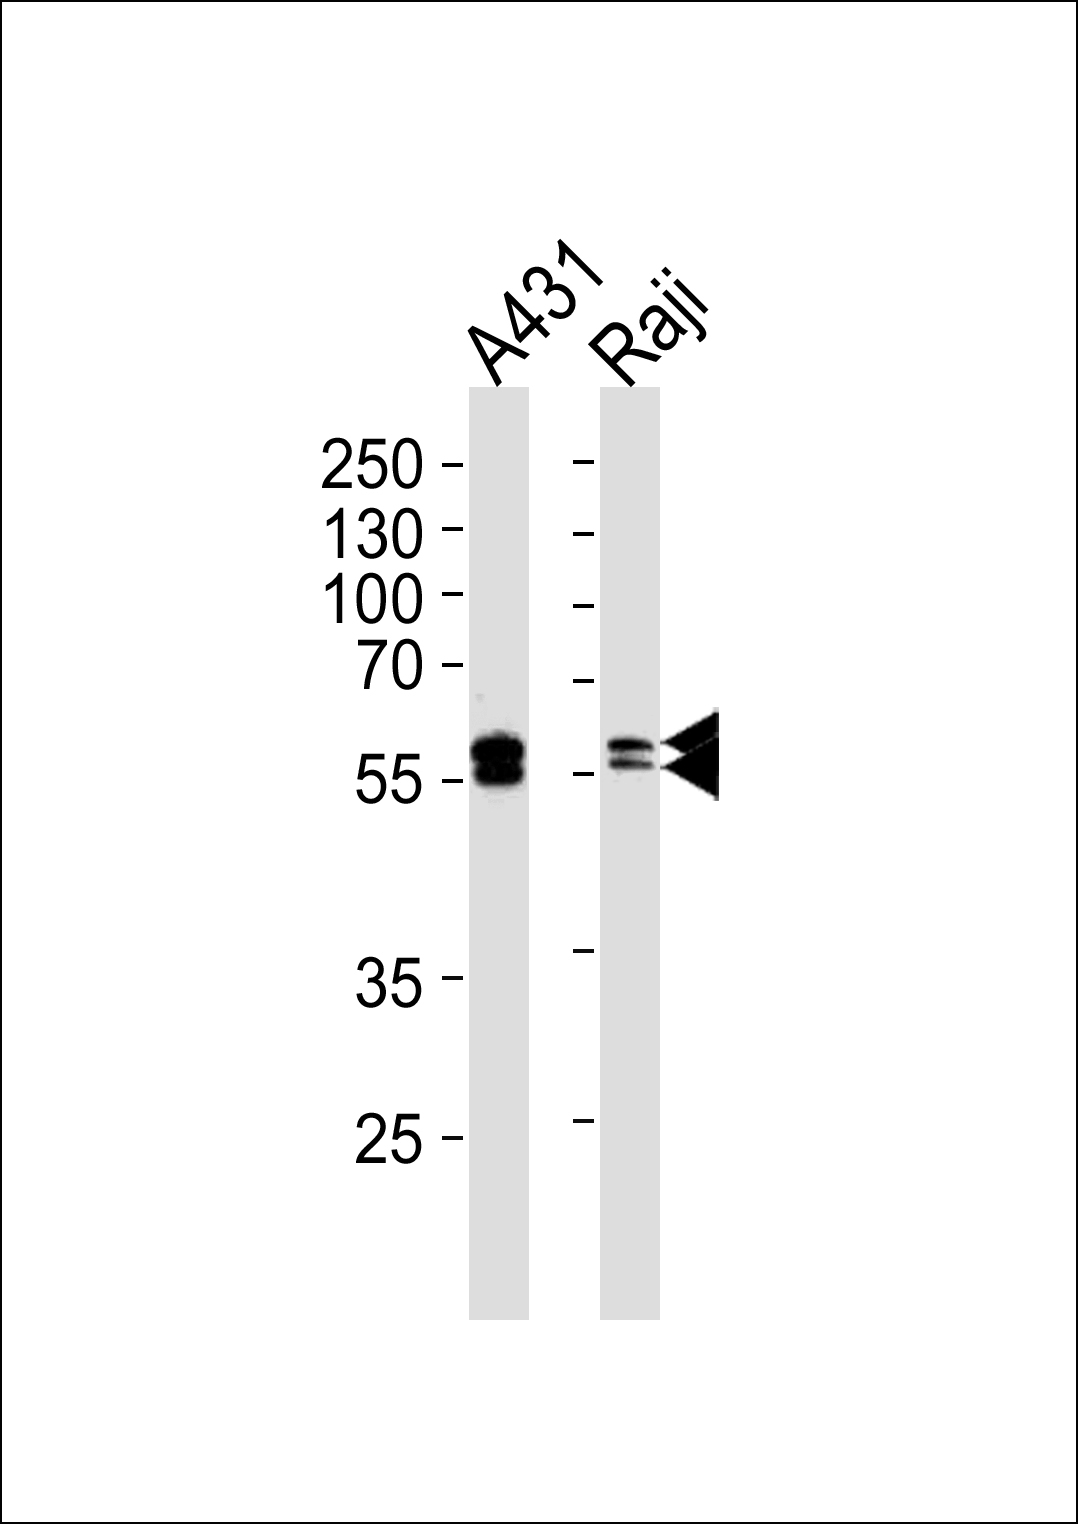 Western blot analysis of lysates from A431, Raji cell line (from left to right), using LYN Antibody(Cat. # AM2258a). AM2258a was diluted at 1:1000 at each lane. A goat anti-mouse IgG H&L(HRP) at 1:5000 dilution was used as the secondary antibody. Lysates at 35?g per lane.